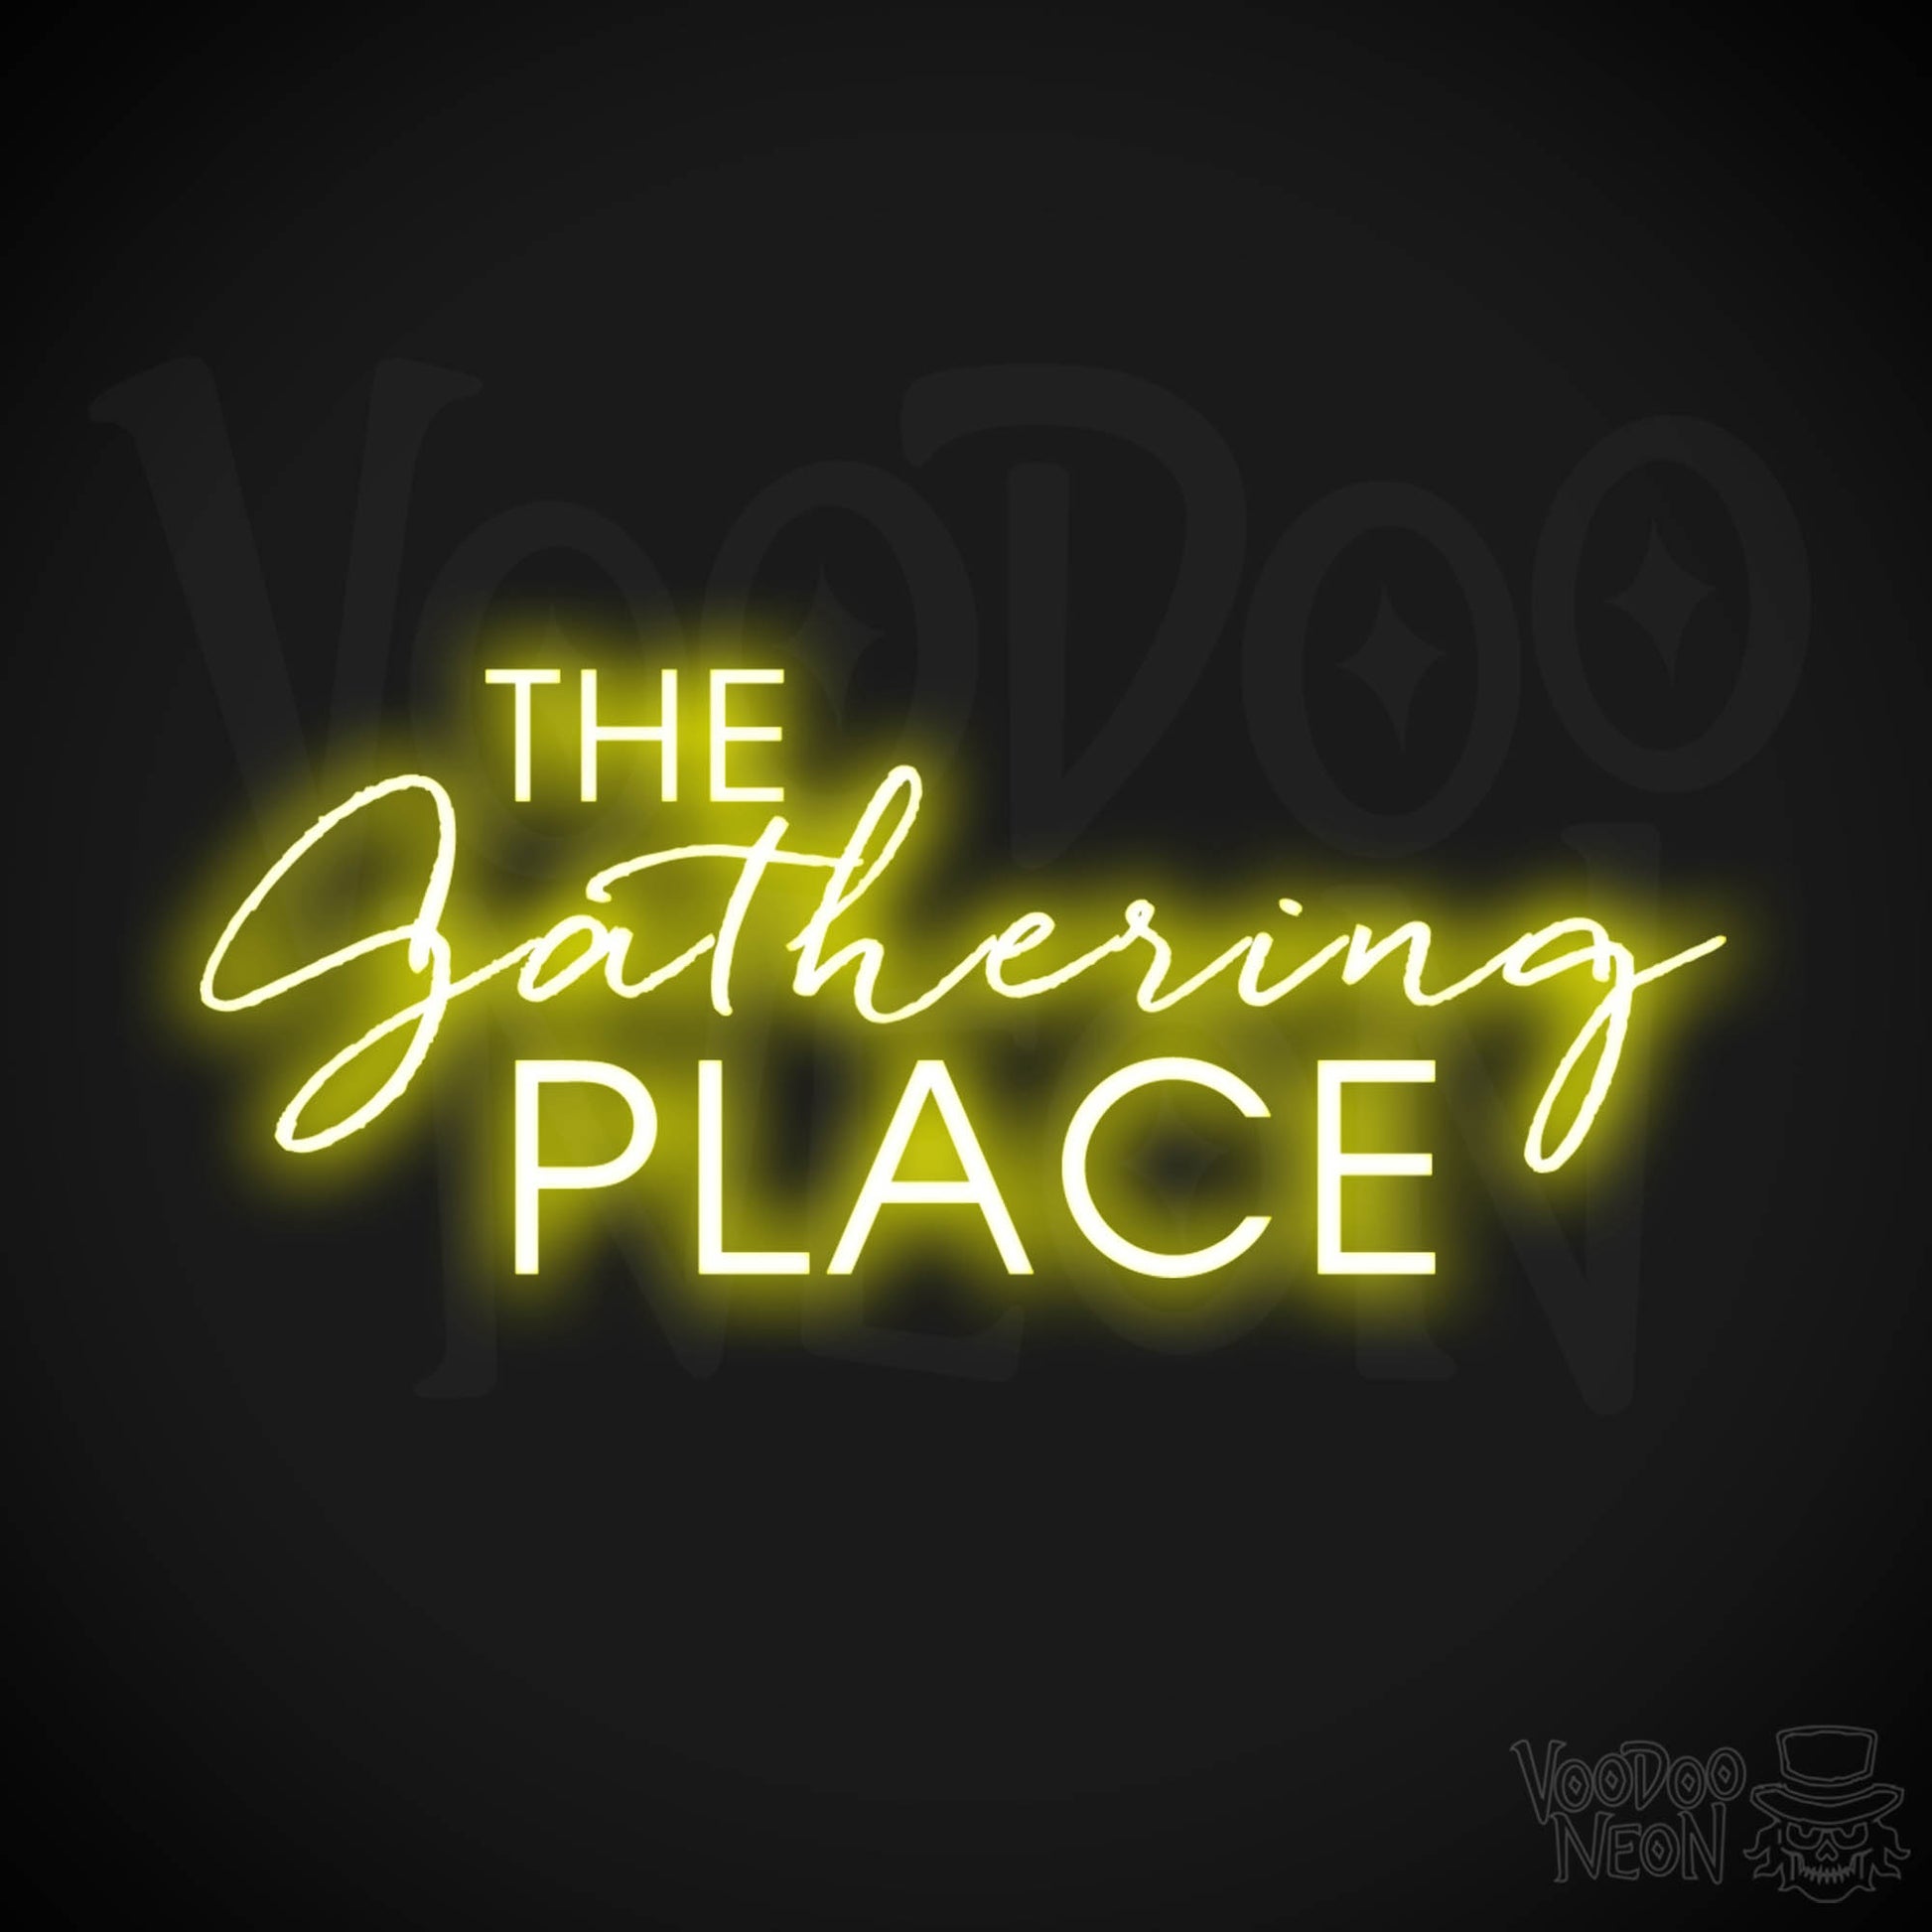 The Gathering Place Neon Sign - Neon The Gathering Place Sign - Wall Art - Color Yellow